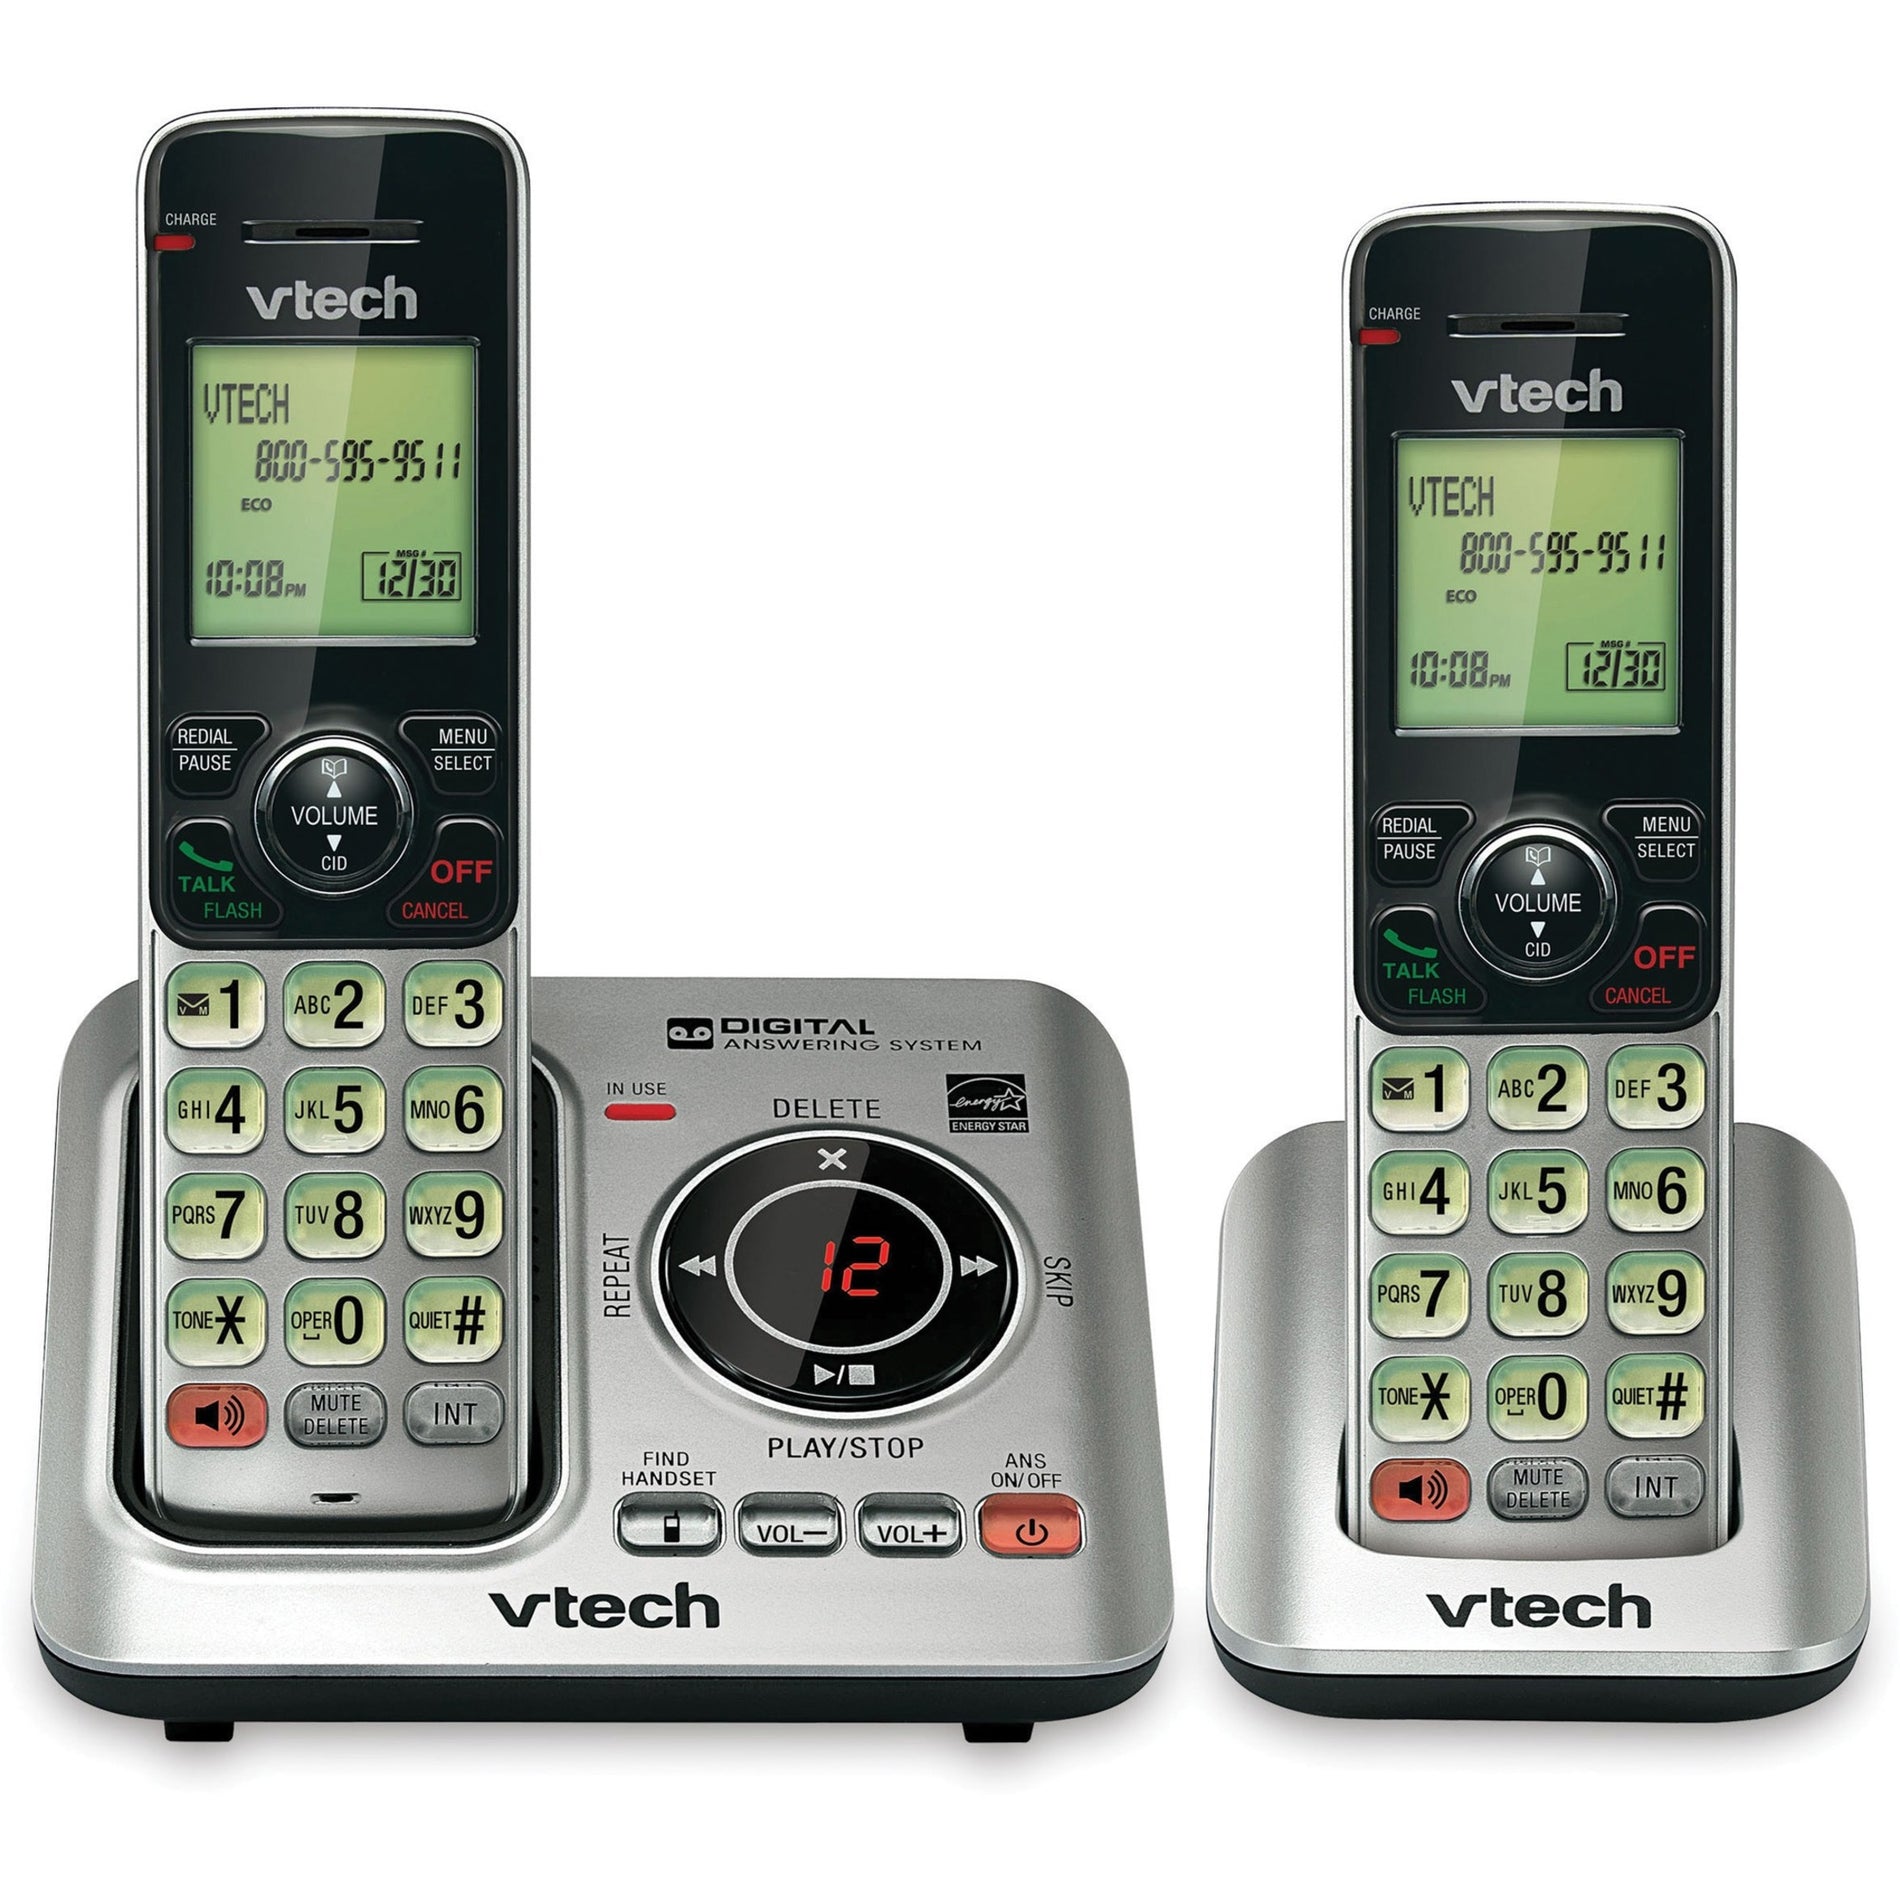 VTech CS6629-2 DECT 6.0 Cordless Phone 2 Handset Answering System with Caller ID/Call Waiting, Expandable, Silent Mode